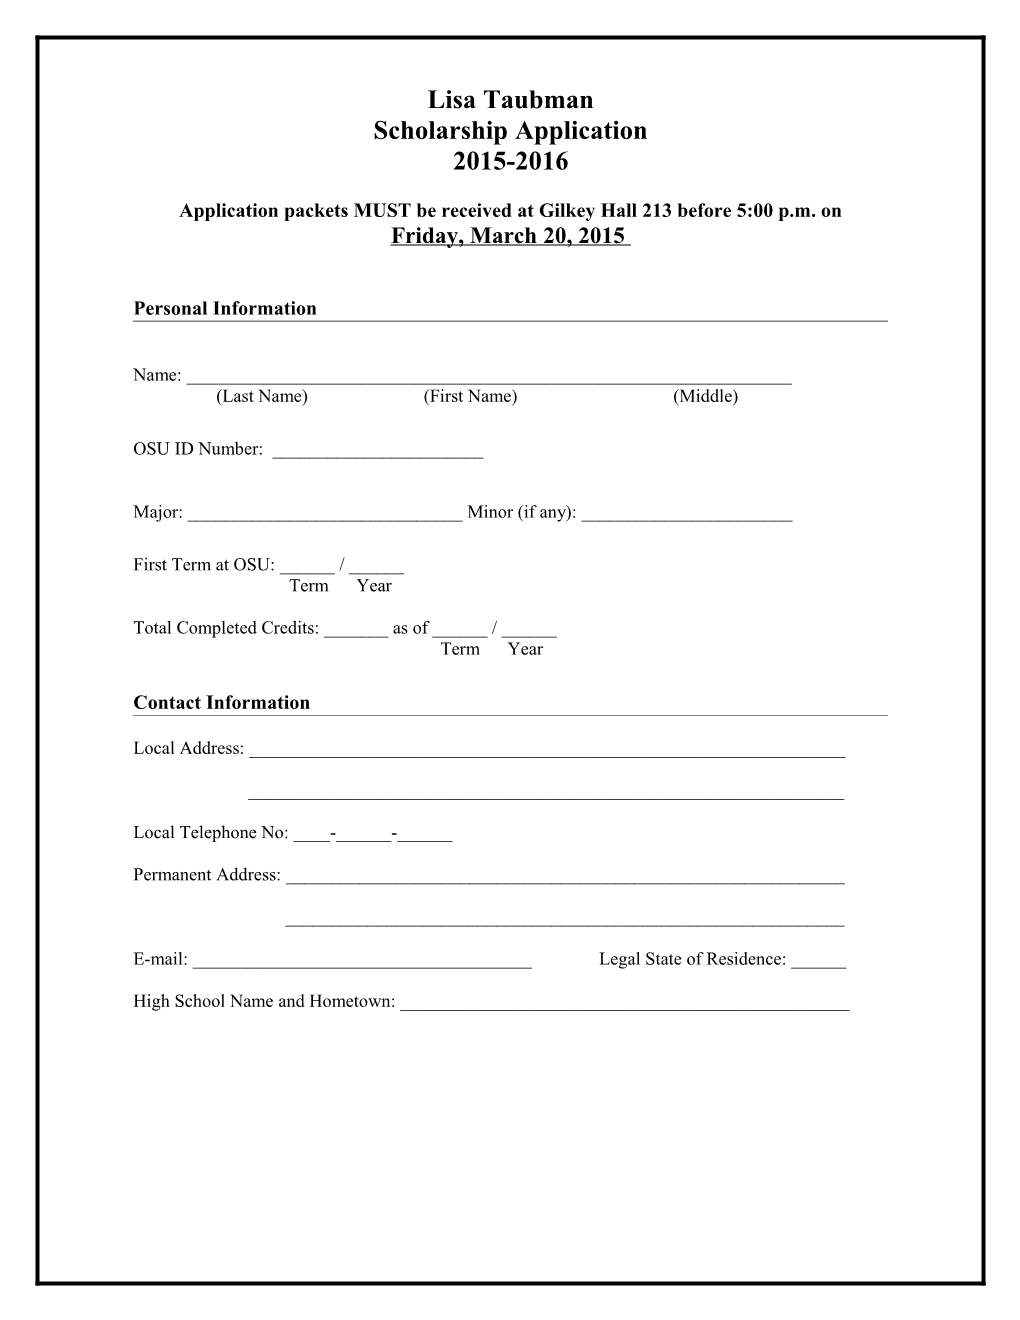 Application Packets MUST Be Received at Gilkey Hall 213 Before 5:00 P.M. On